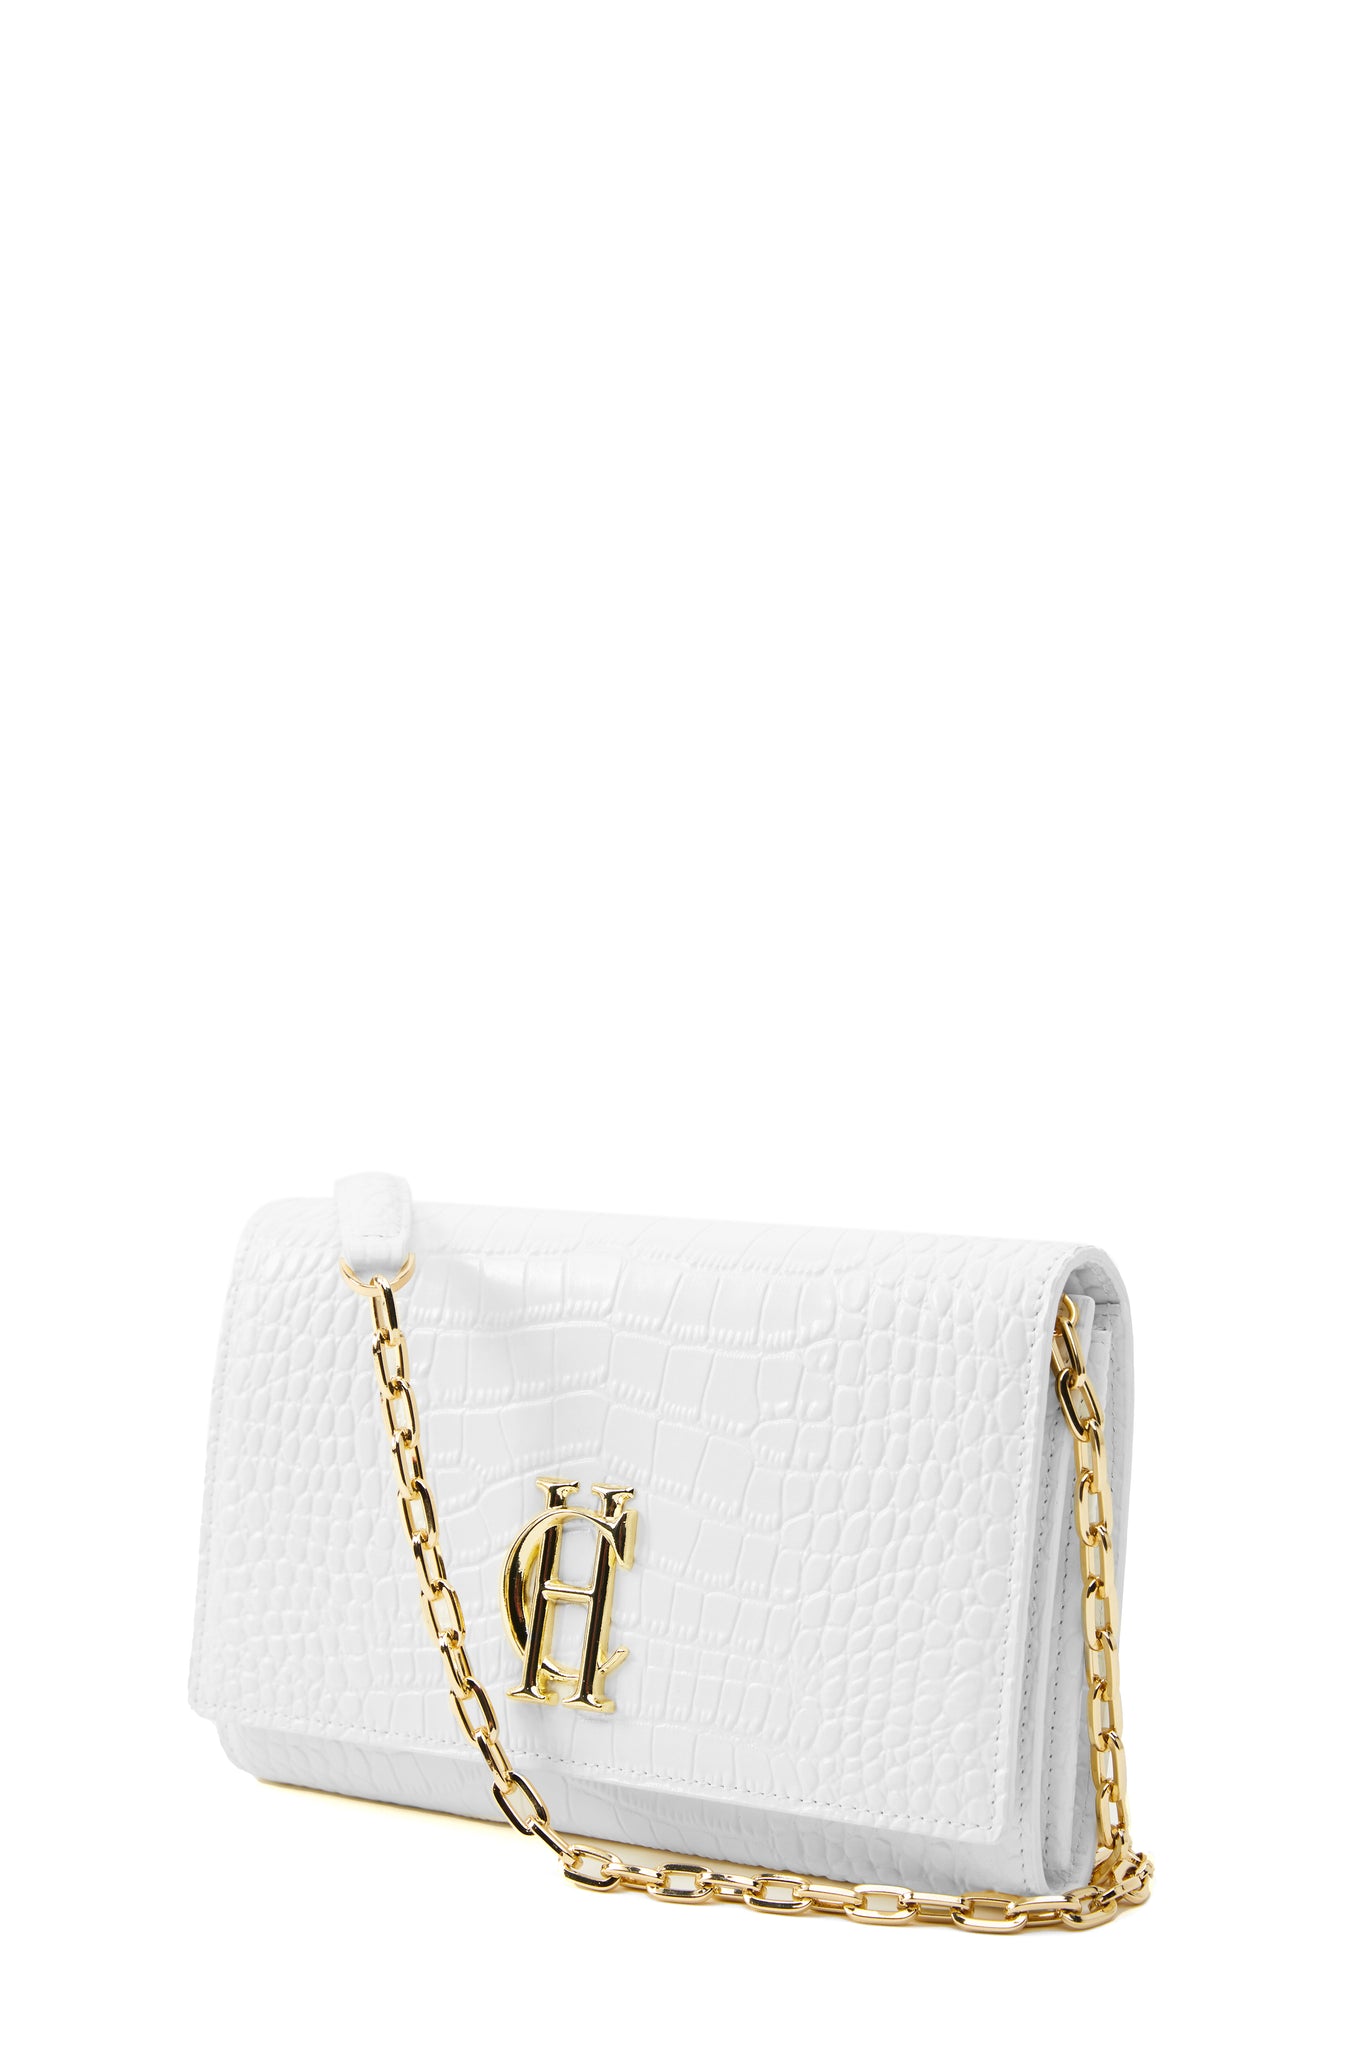 womens white croc embossed leather clutch bag with gold hardware and gold chain